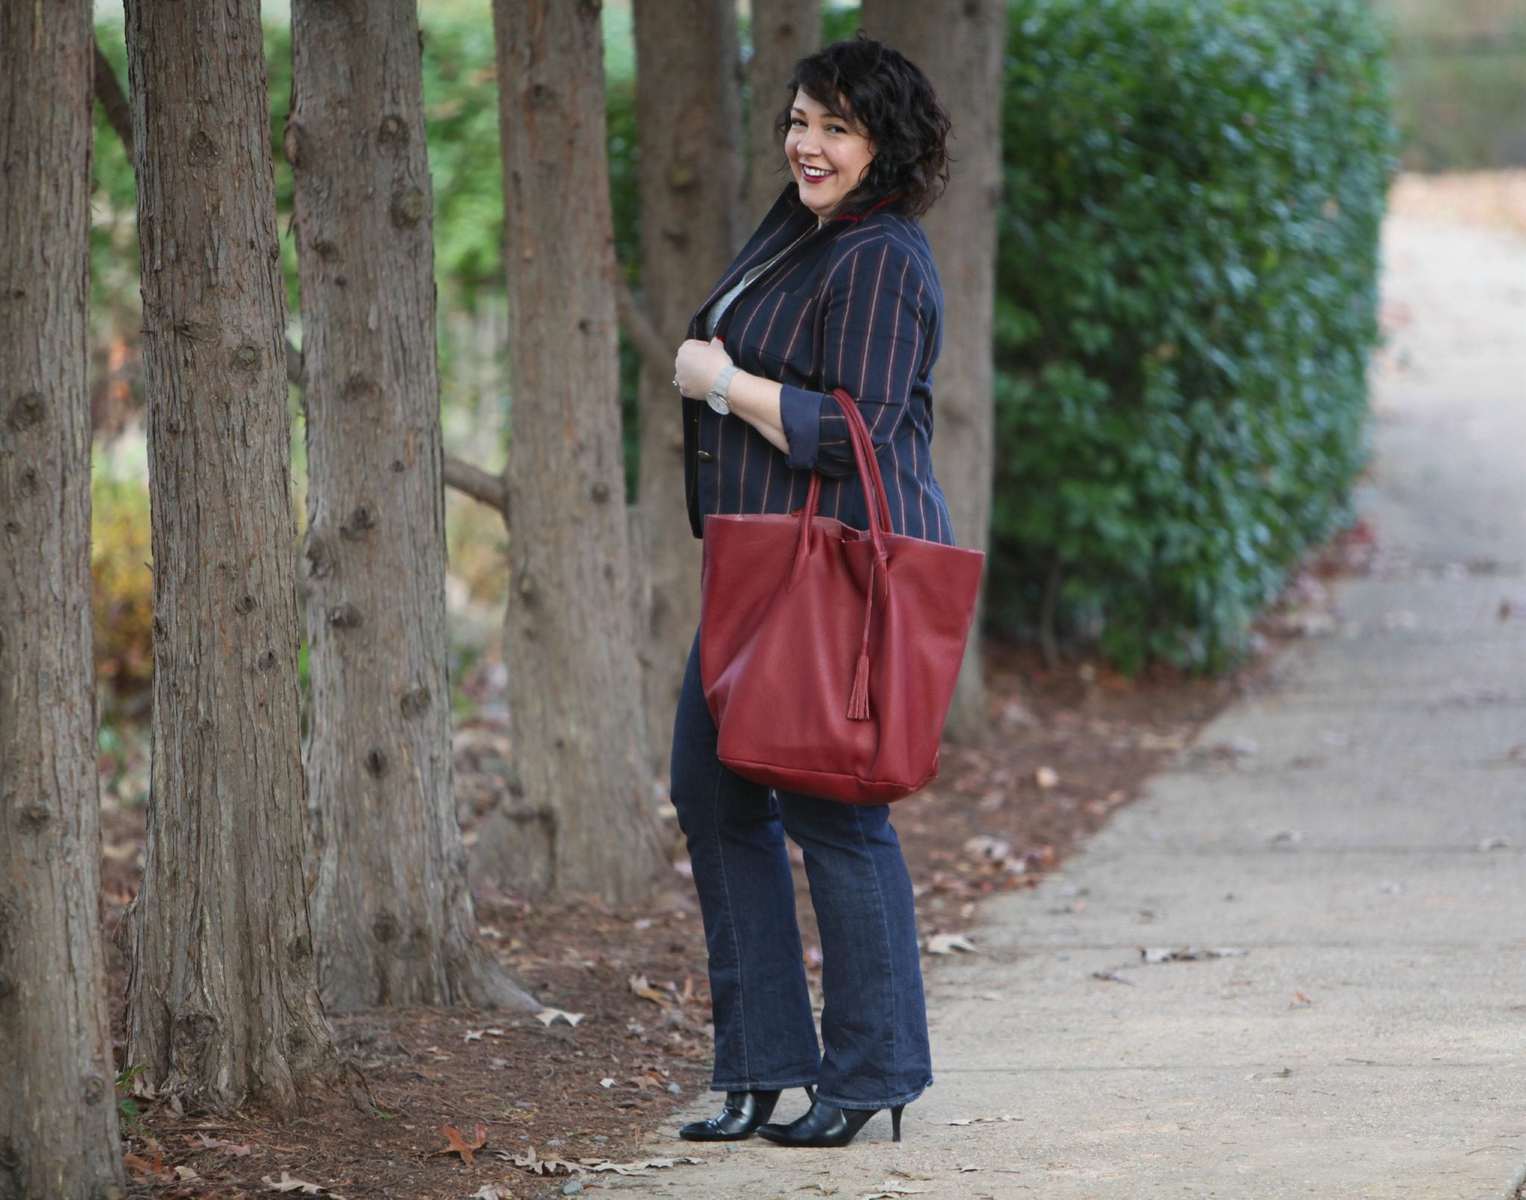 Wardrobe Oxygen wearing a blazer and jeans from Talbots with ADORA Bags tote in Limited Edition Marsala Leather